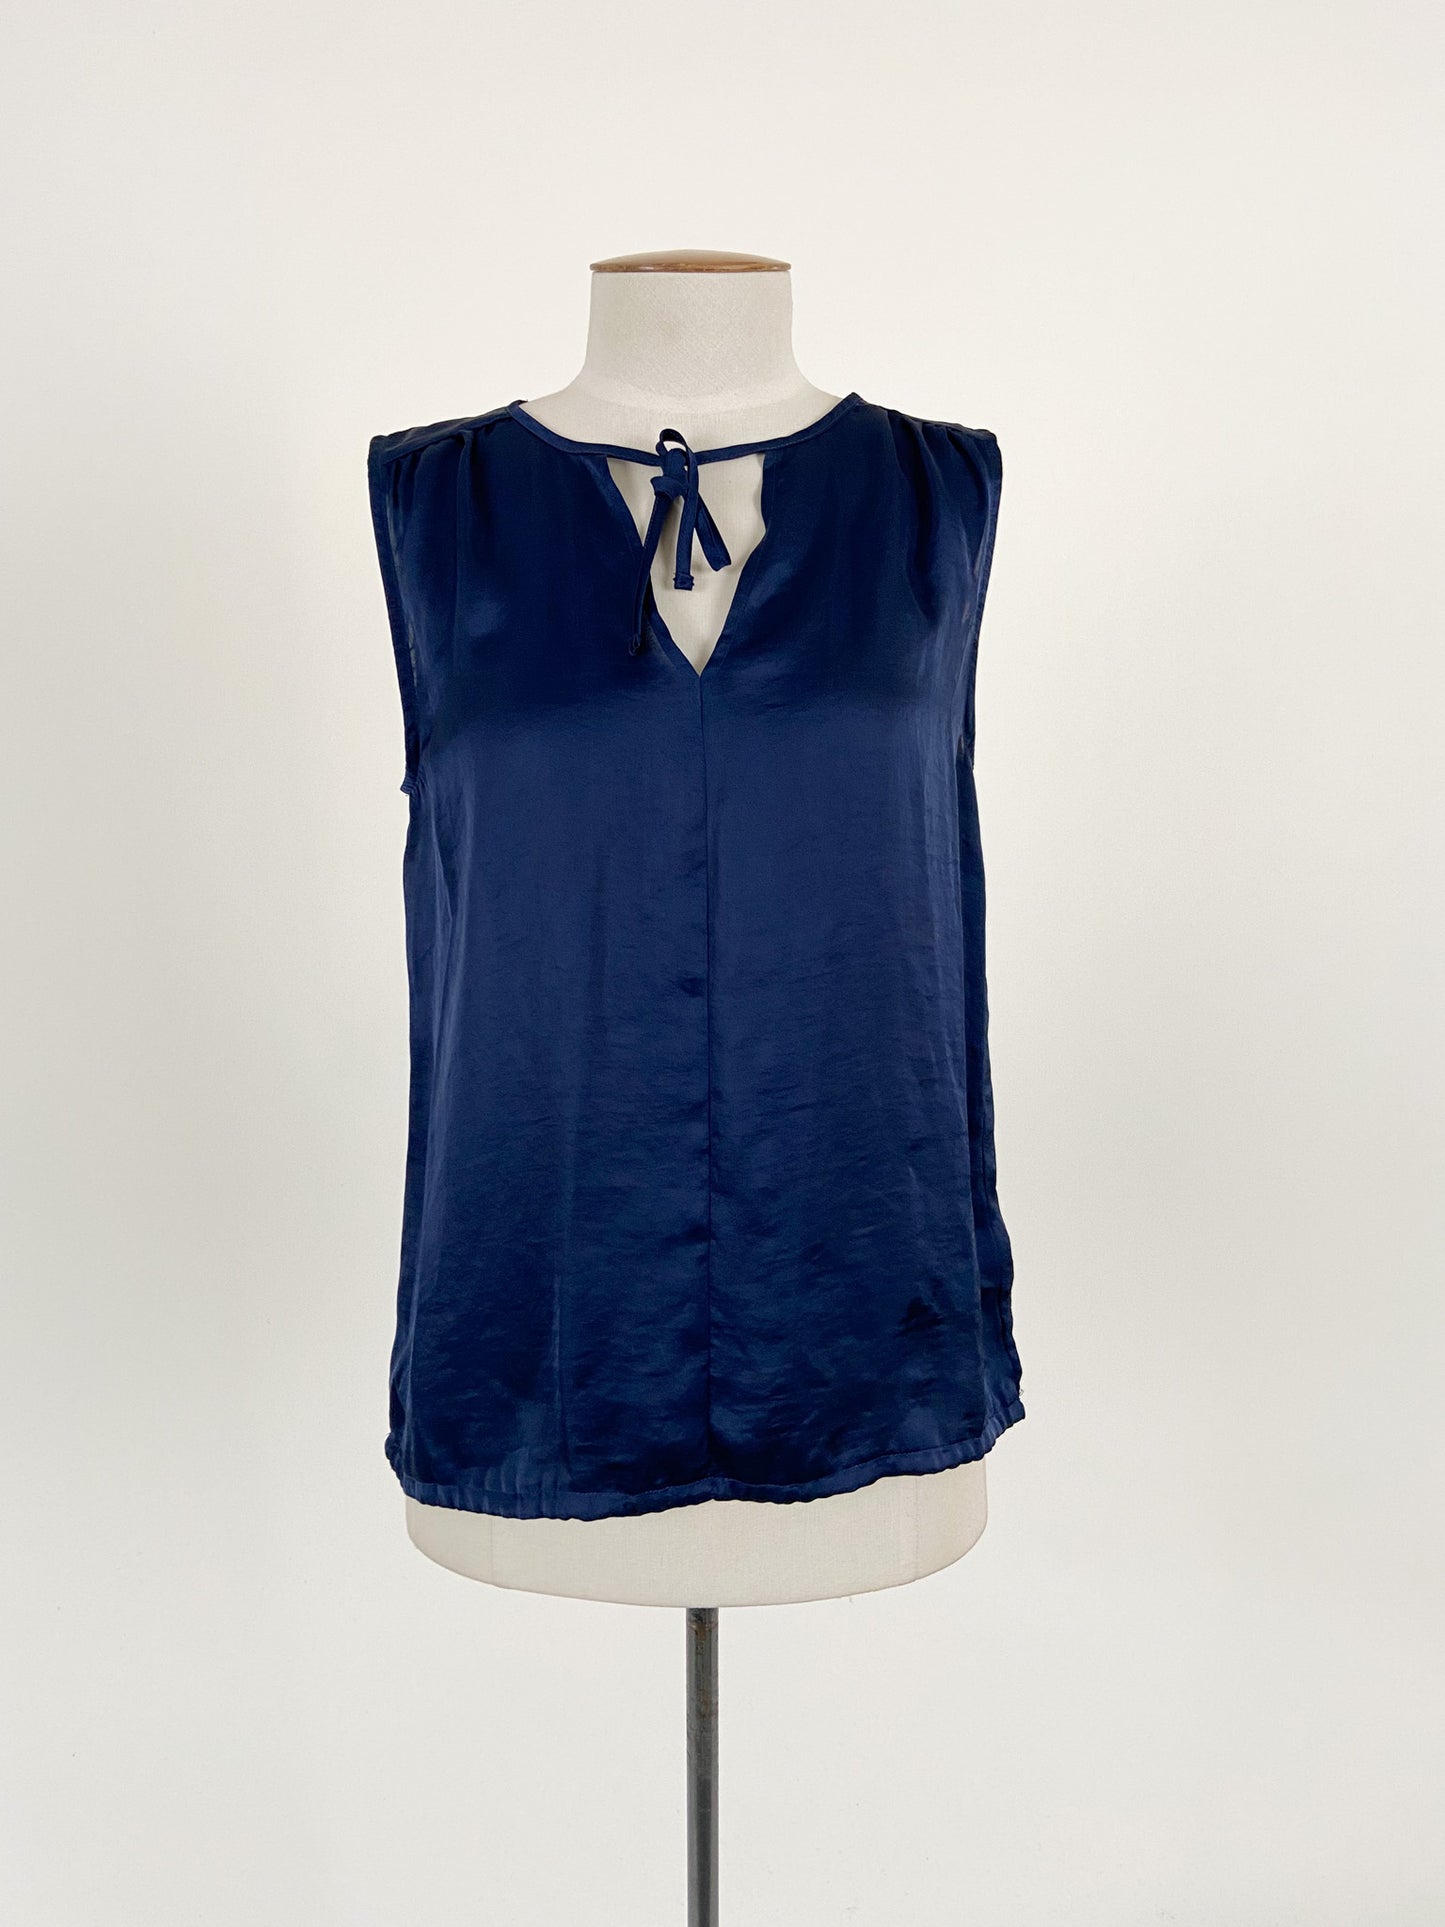 GAP | Navy Casual/Workwear Top | Size XS